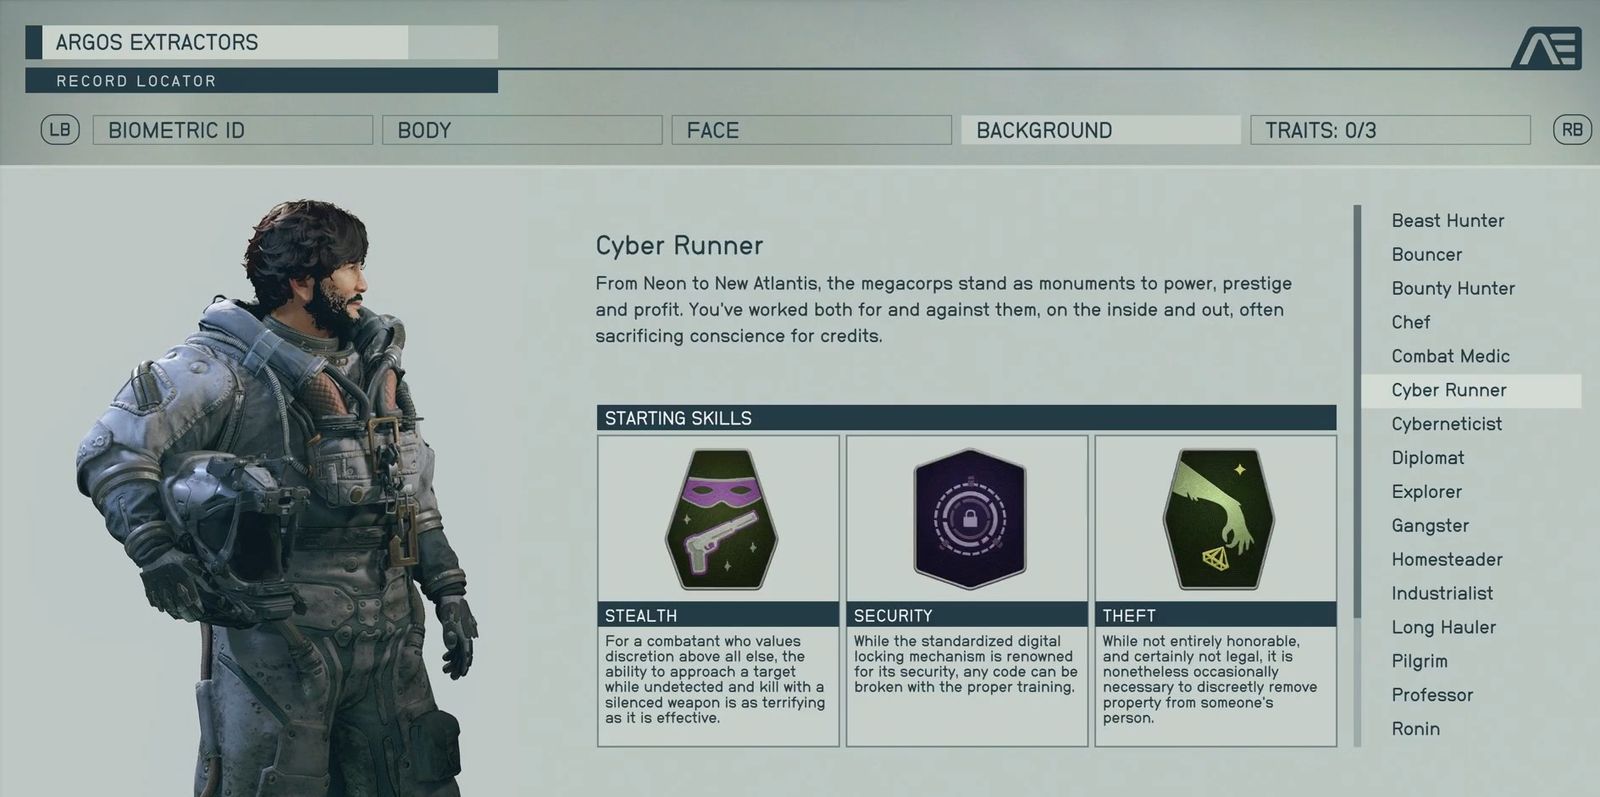 Starfield's character creation screen, showing the Cyber Runner background